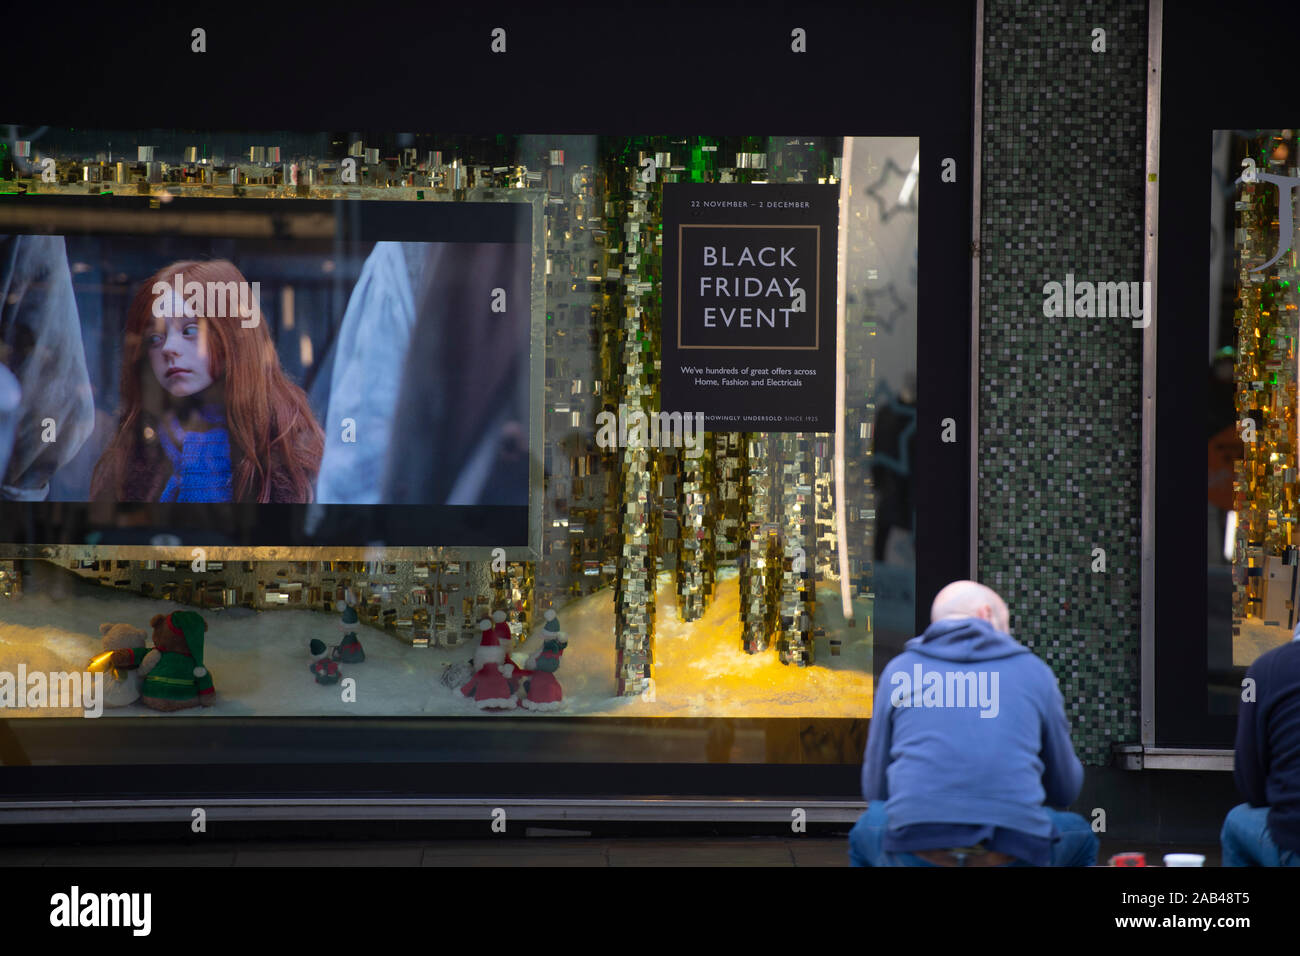 Oxford Street, London, UK. 25th November 2019. Shops in London’s Oxford Street offer a week of Black Friday discounts in the run-up to Christmas. Credit: Malcolm Park/Alamy Live News. Stock Photo